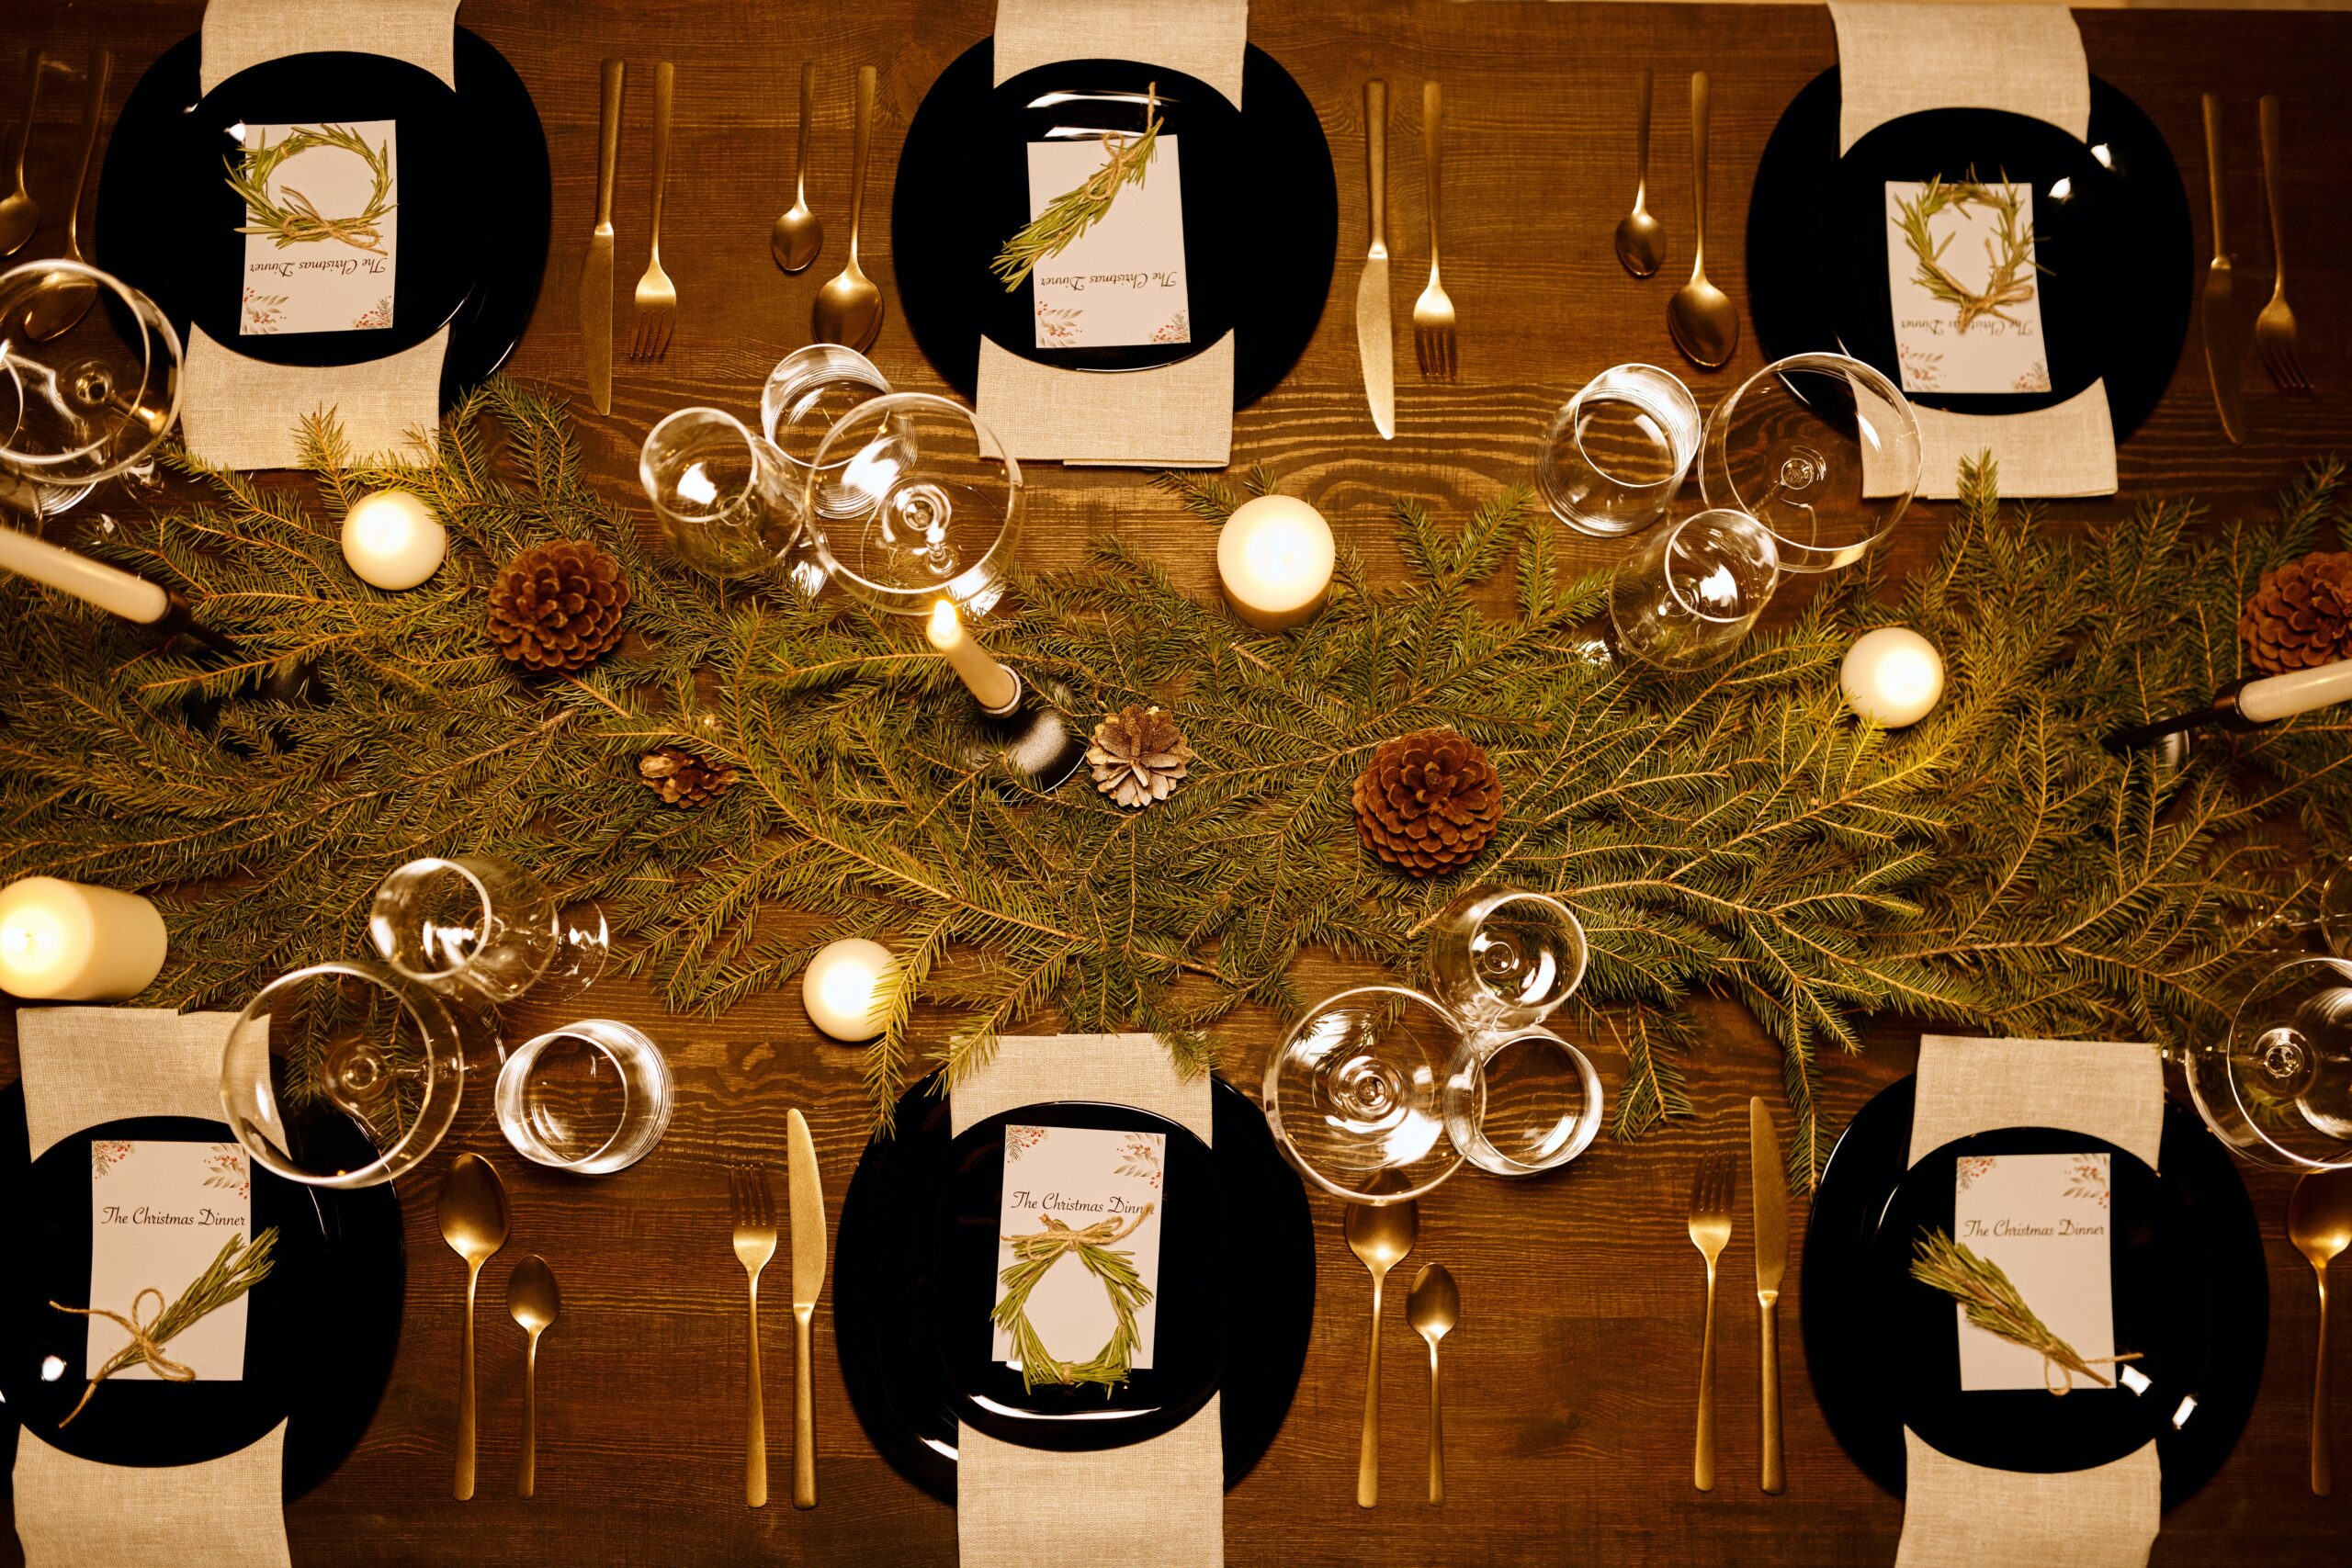 Match your tablescape with your holiday decor. Pictured: A Christmas tablescape.